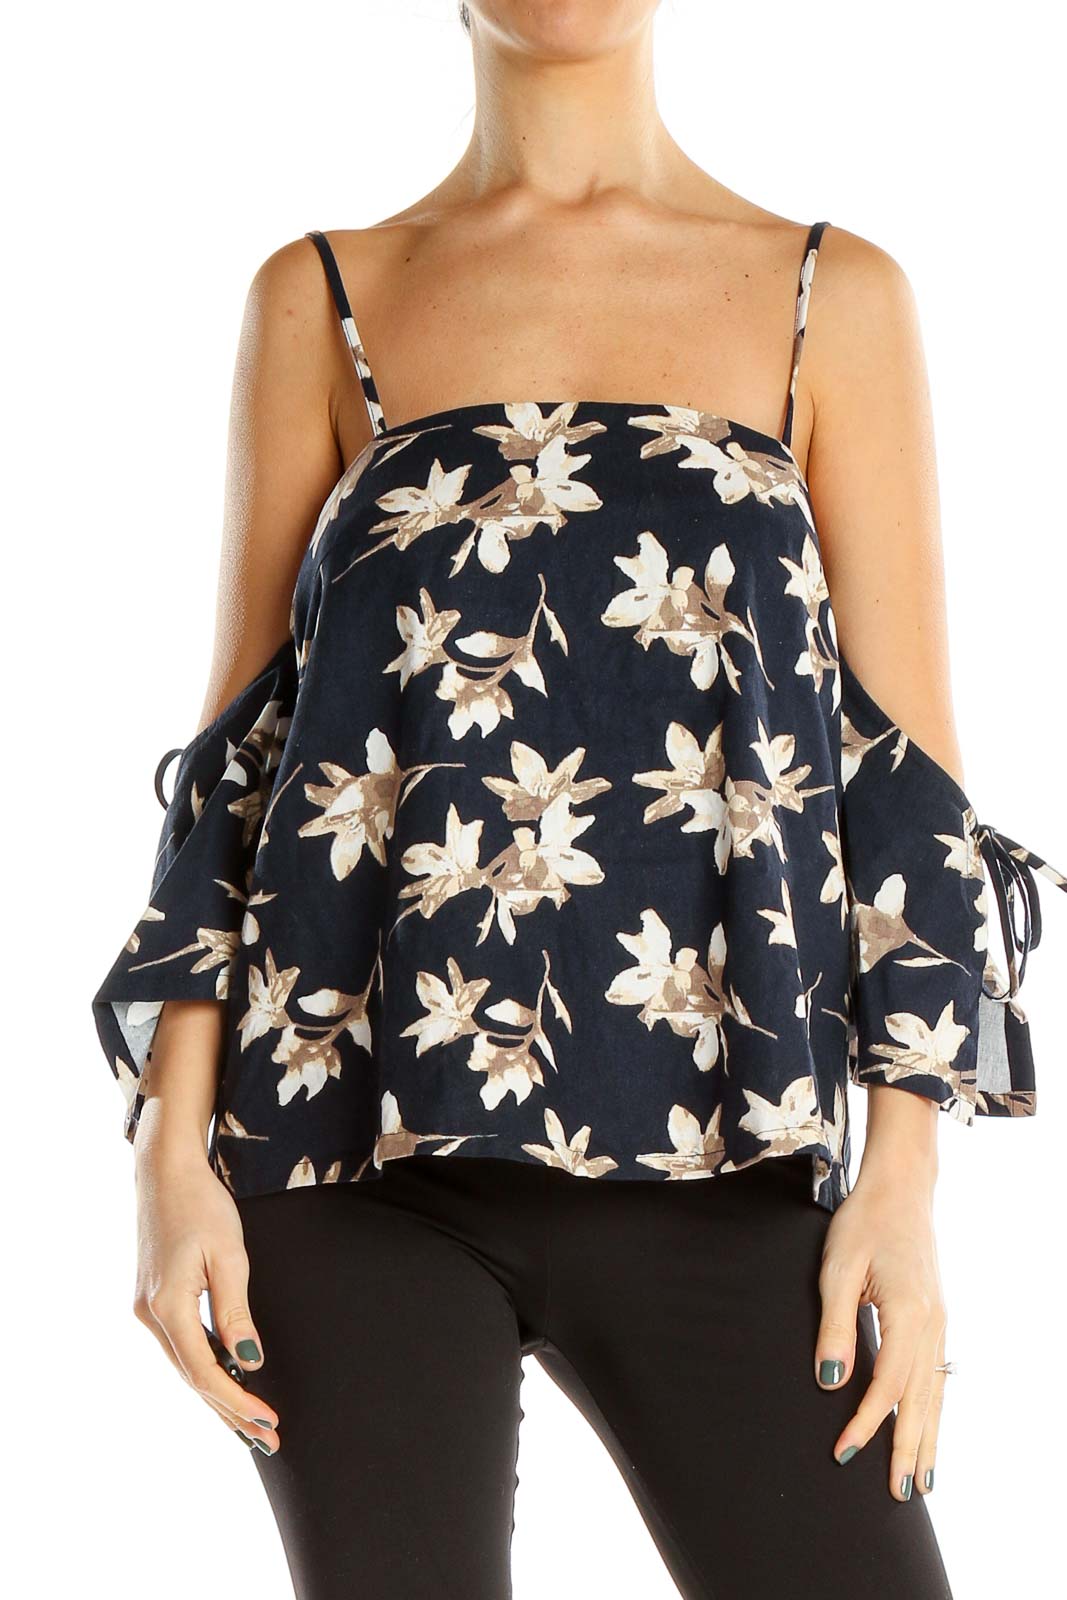 Blue Floral Print Holiday Top Front